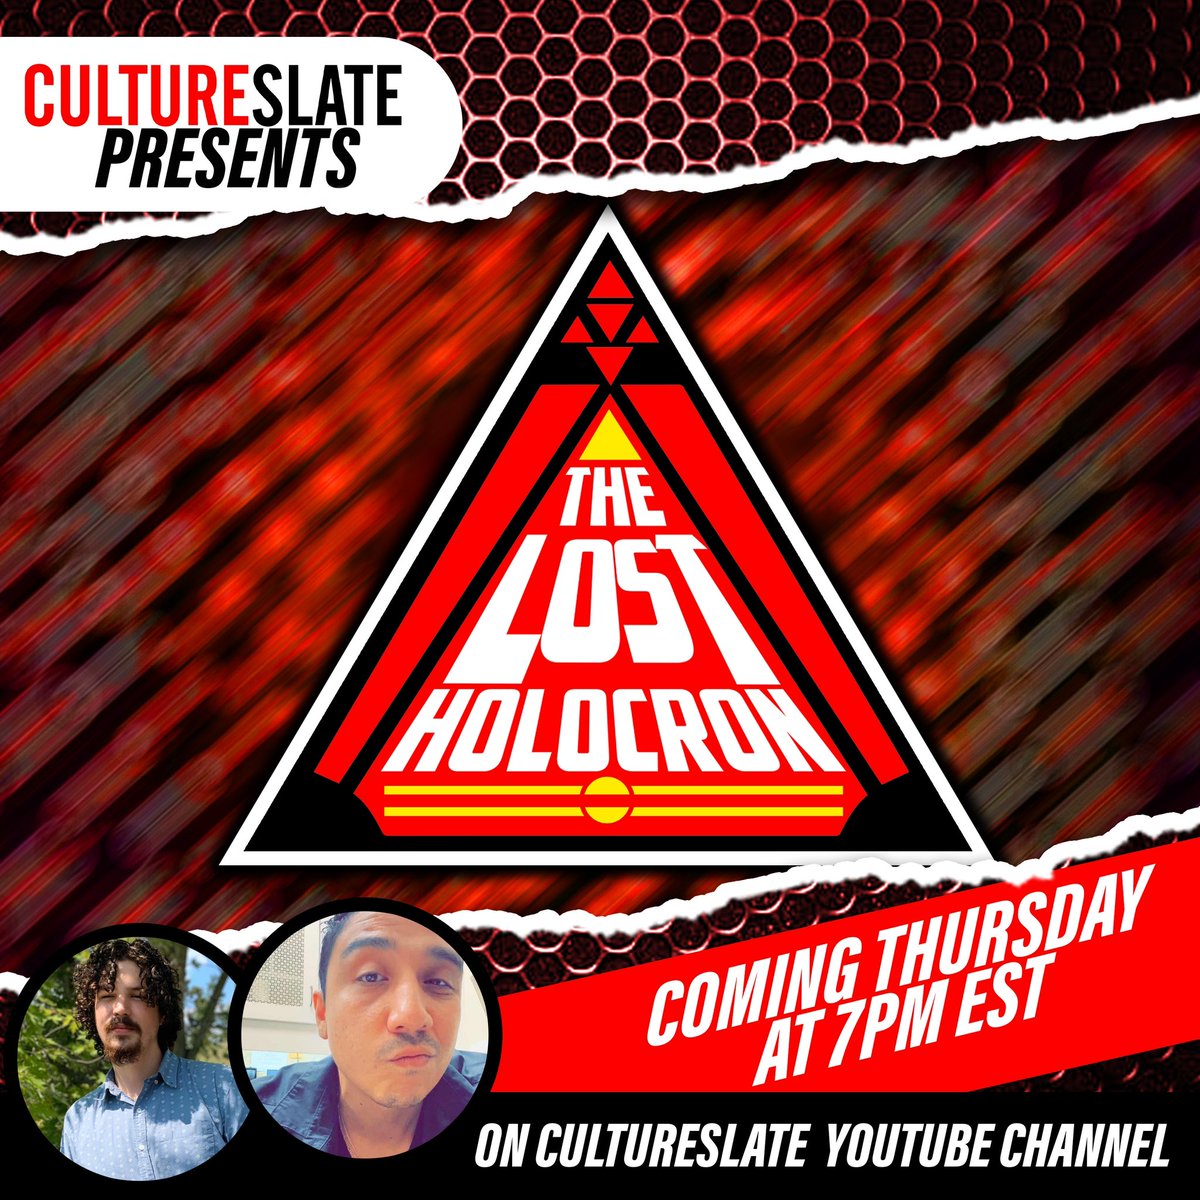 #TheLostHolocron — a Star Wars centric podcast that also covers all of the biggest fandoms — is coming to the CultureSlate YouTube channel on Thursday at 7 PM ET! Join James & Richard each week to talk about the latest in Star Wars, Marvel, DC, & more! Subscribe below 👇